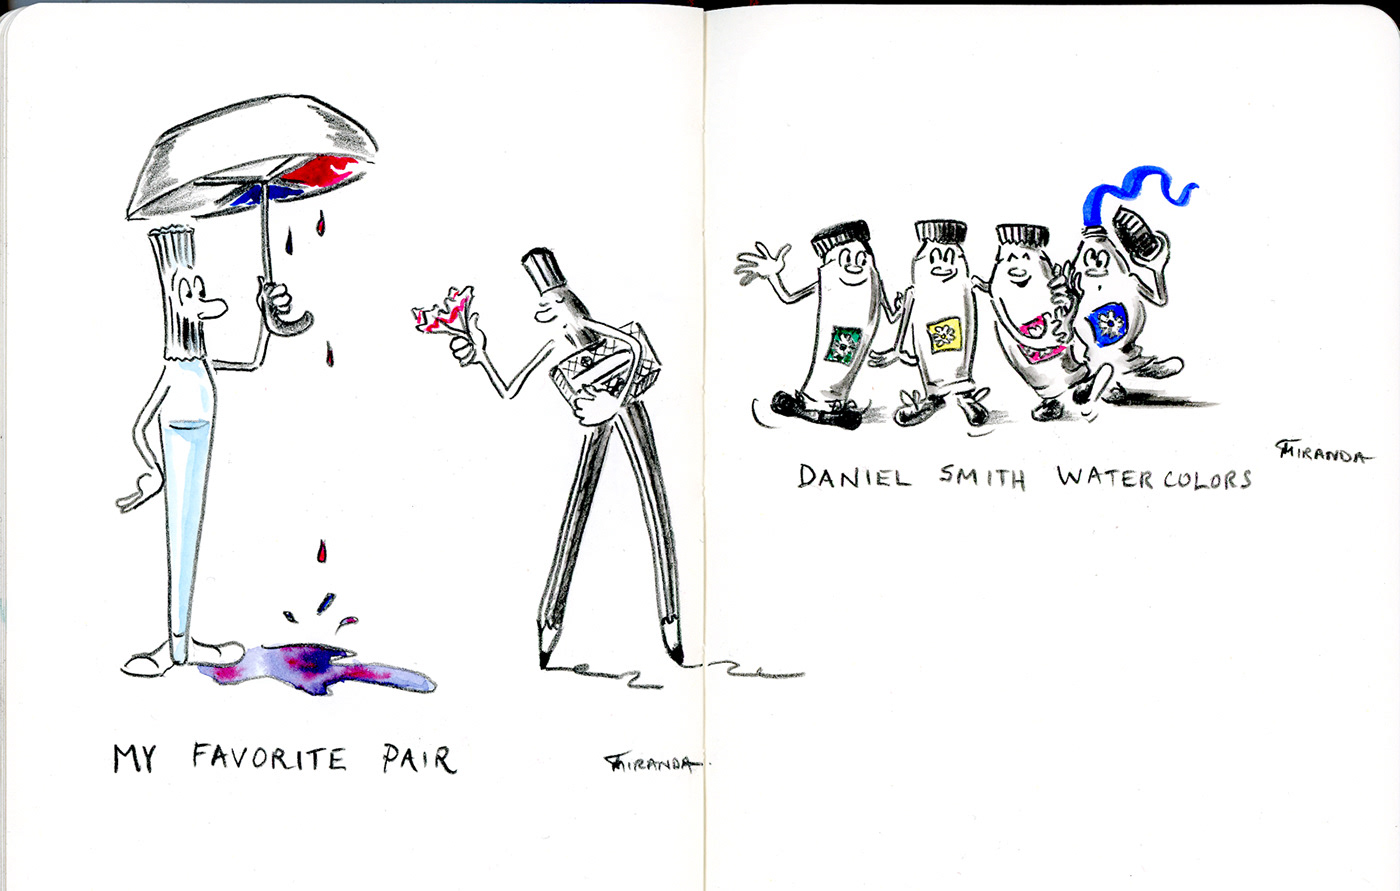 My favorite drawing implements are brought to life in these whimsical cartoon sketches